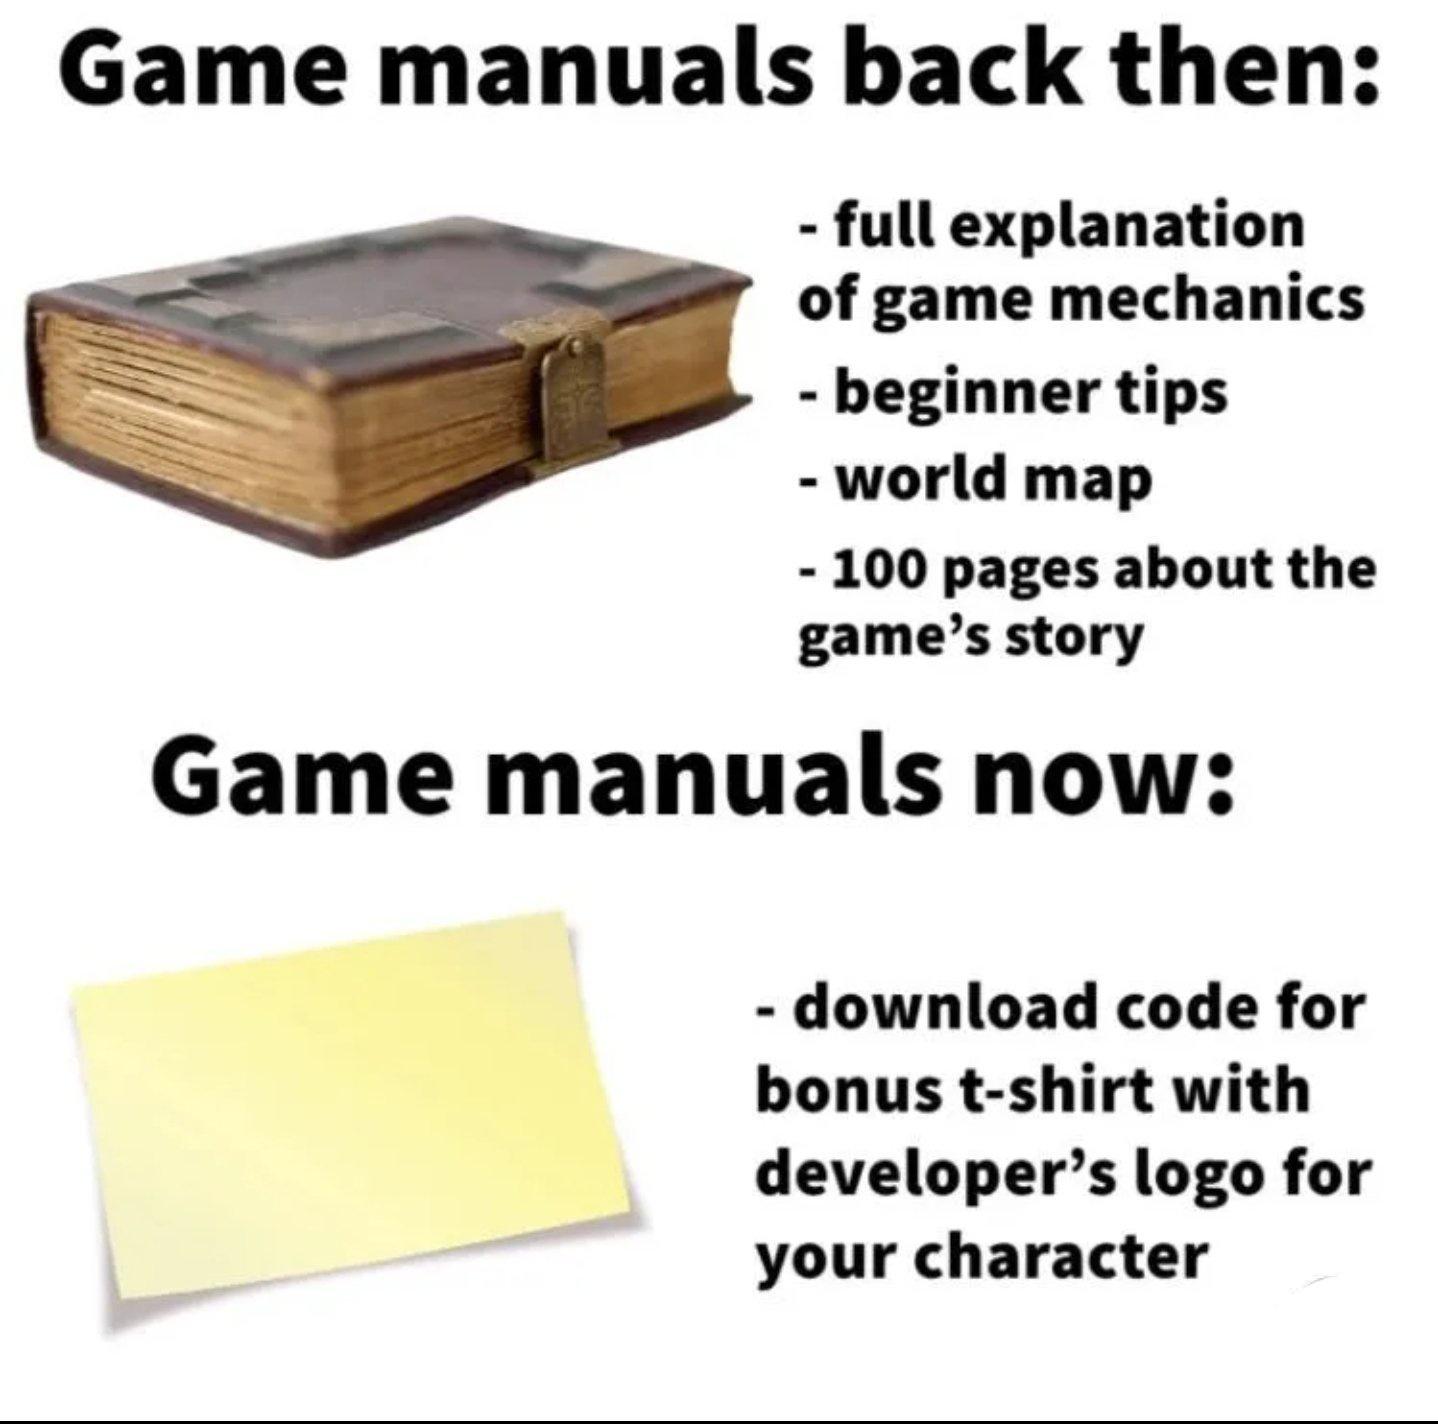 gaming memes - Game - Game manuals Game manuals now back then full explanation of game mechanics beginner tips world map 100 pages about the game's story download code for bonus tshirt with developer's logo for your character